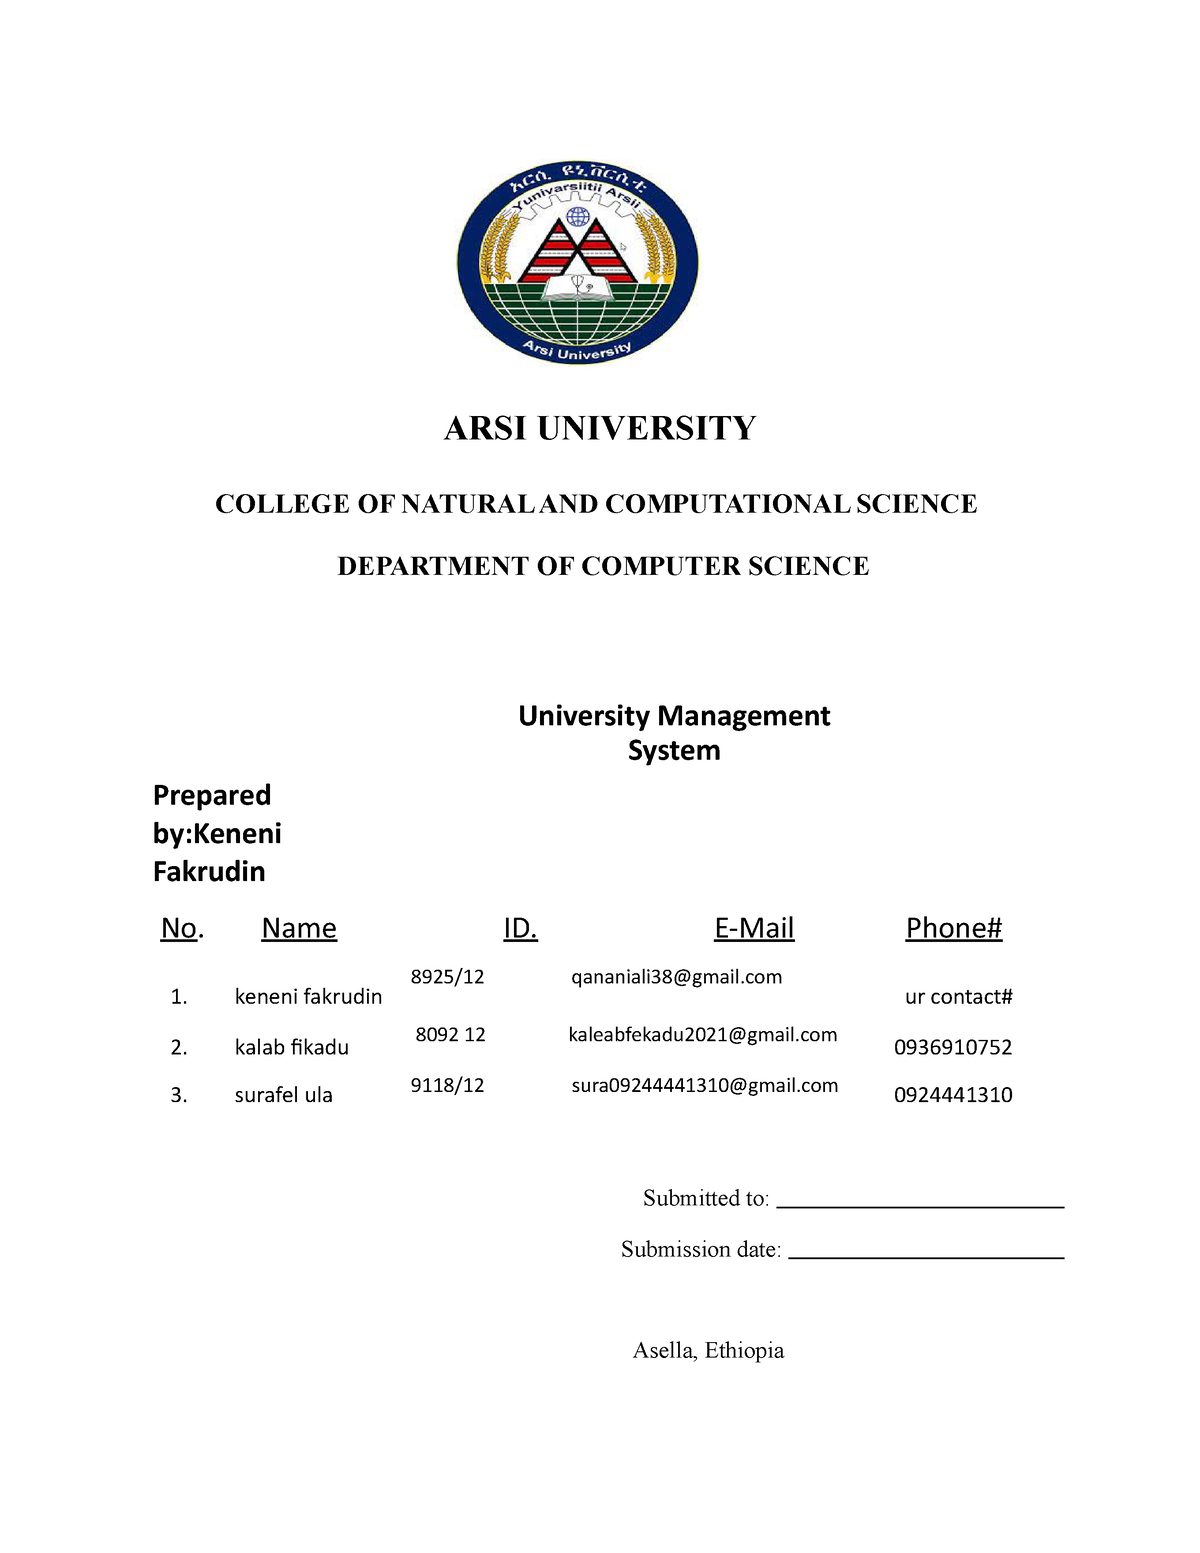 Proposal Guideline Copy Arsi University College Of Natural And Computational Science